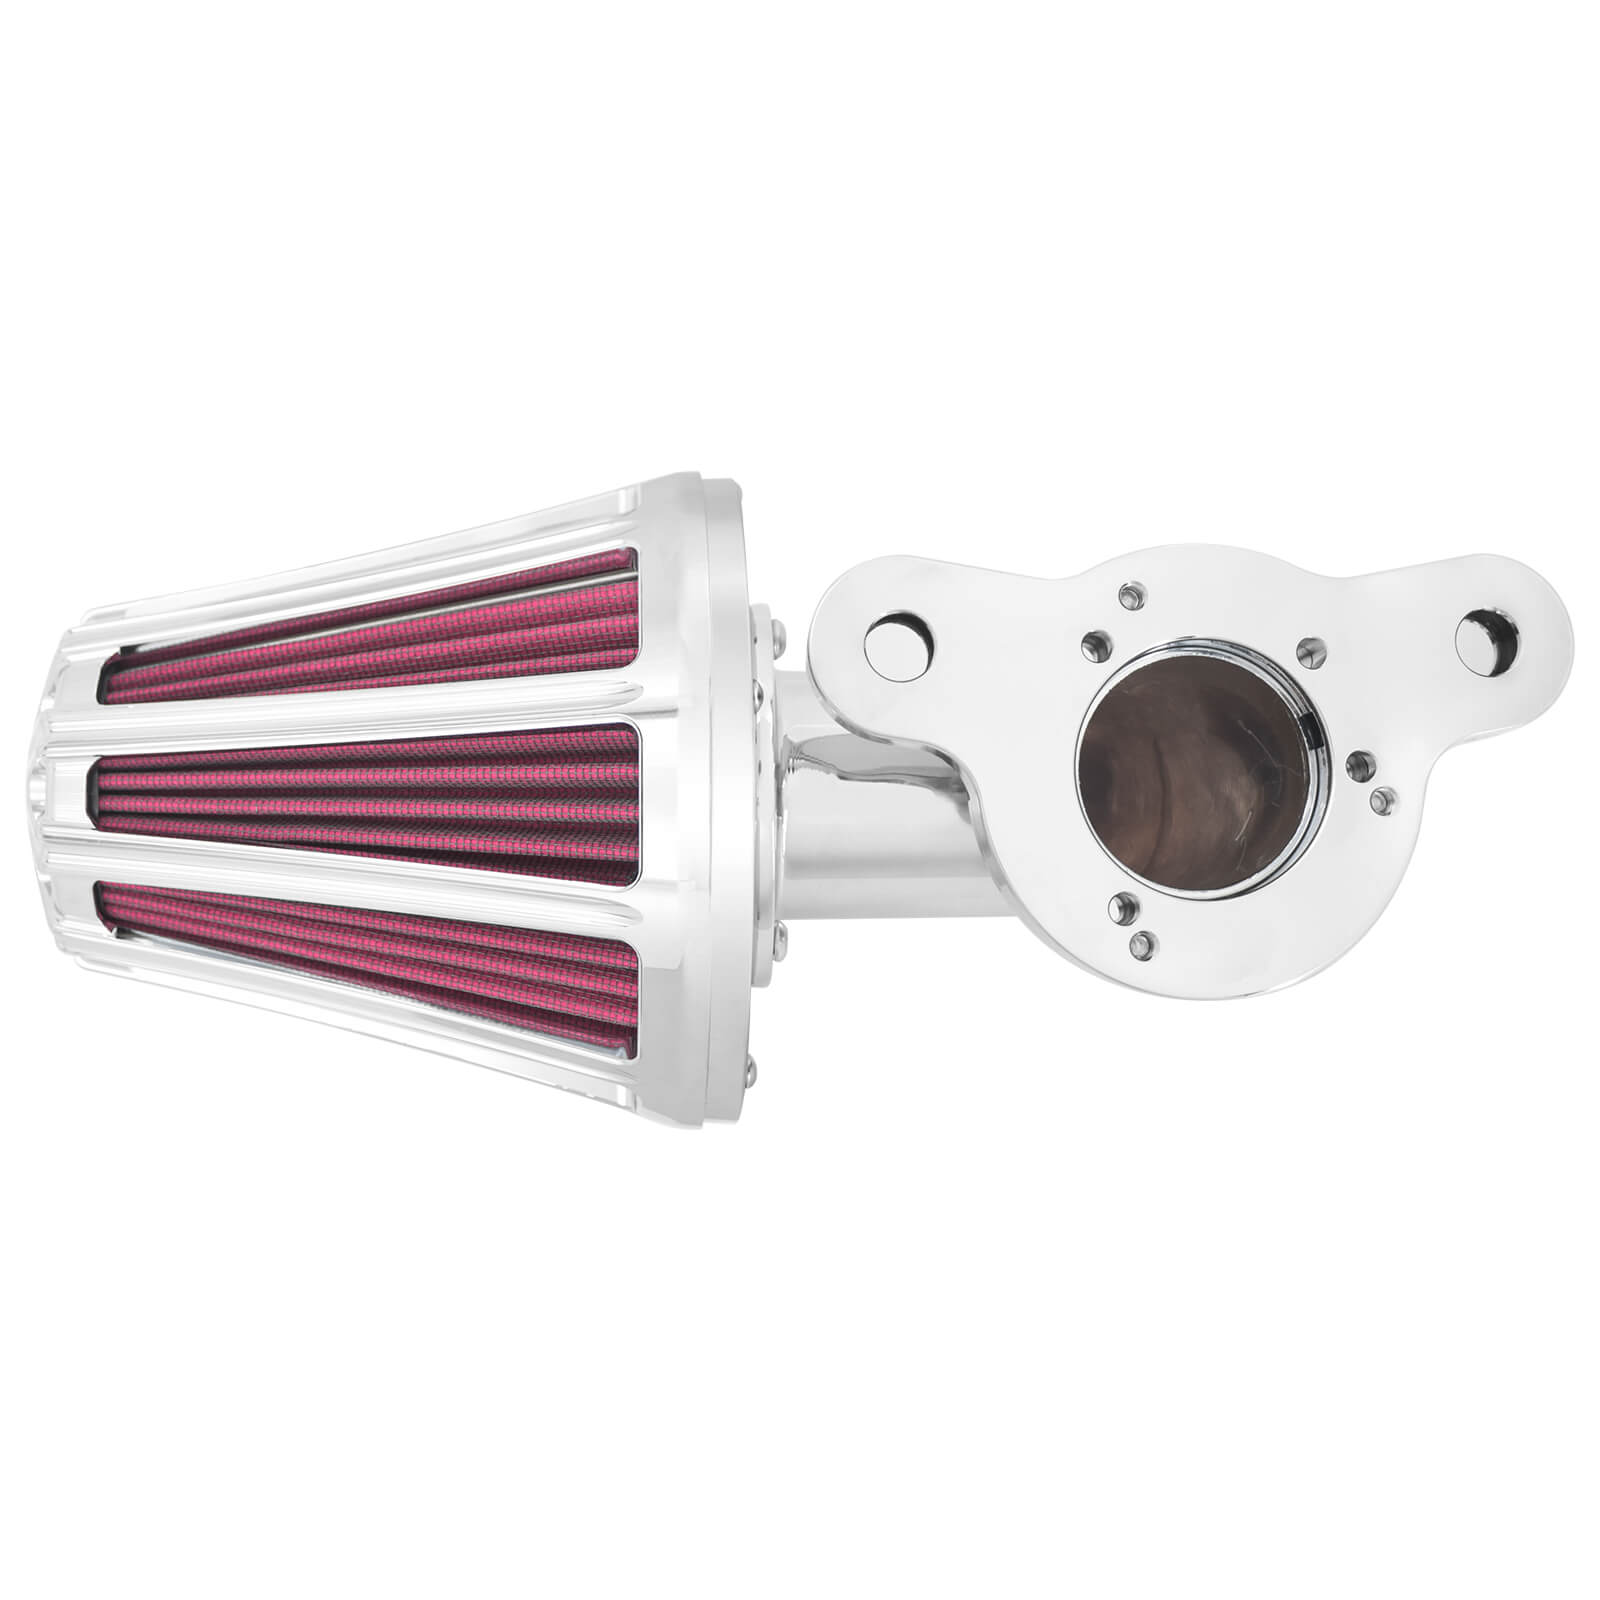 Mactions Air Filter with Eye-catching Chrome Finish